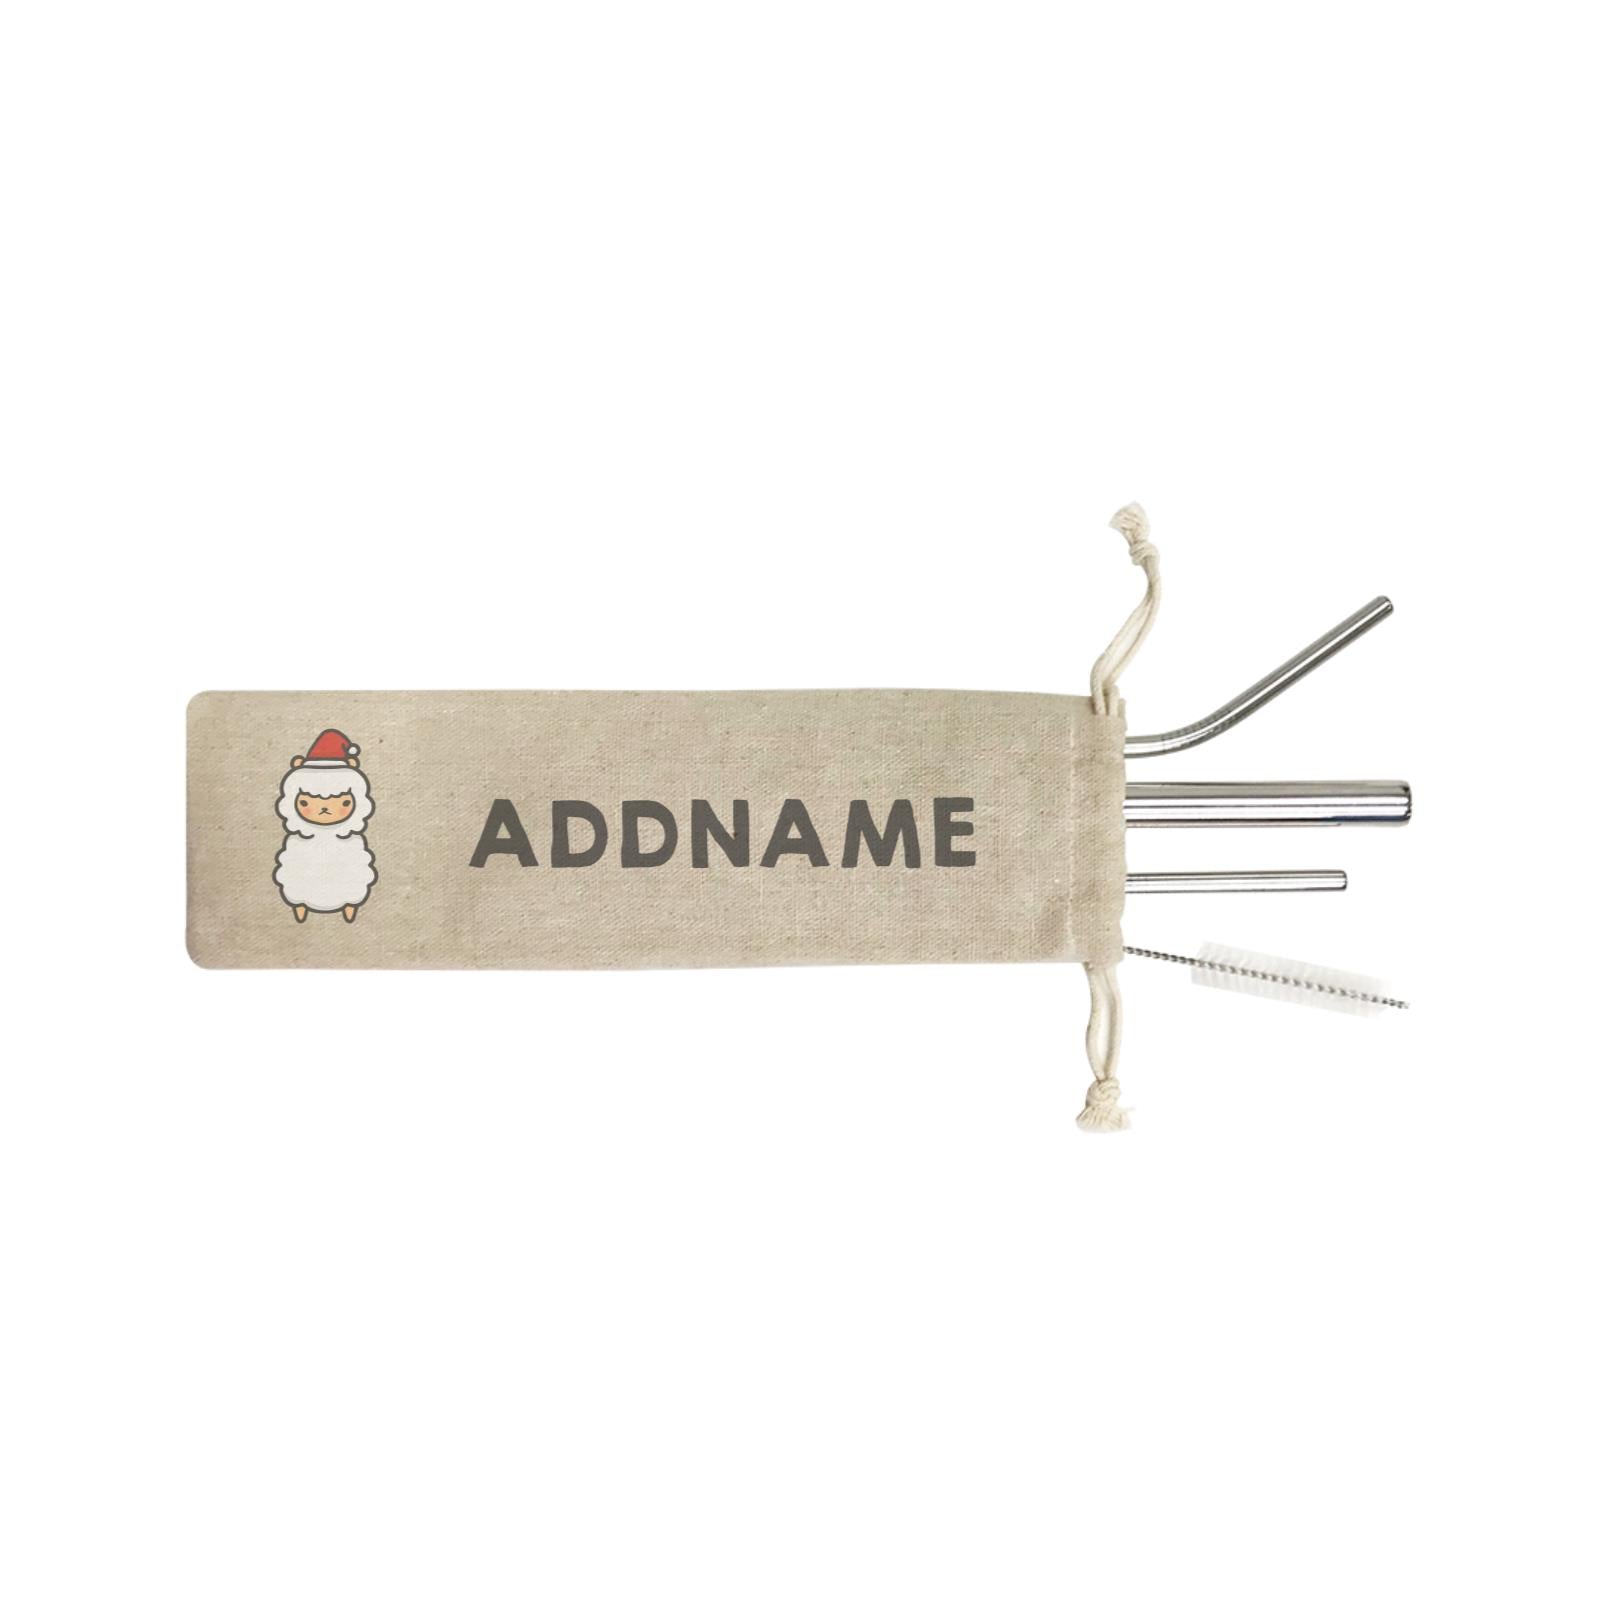 Xmas Cute Alpaca Addname SB 4-in-1 Stainless Steel Straw Set In a Satchel